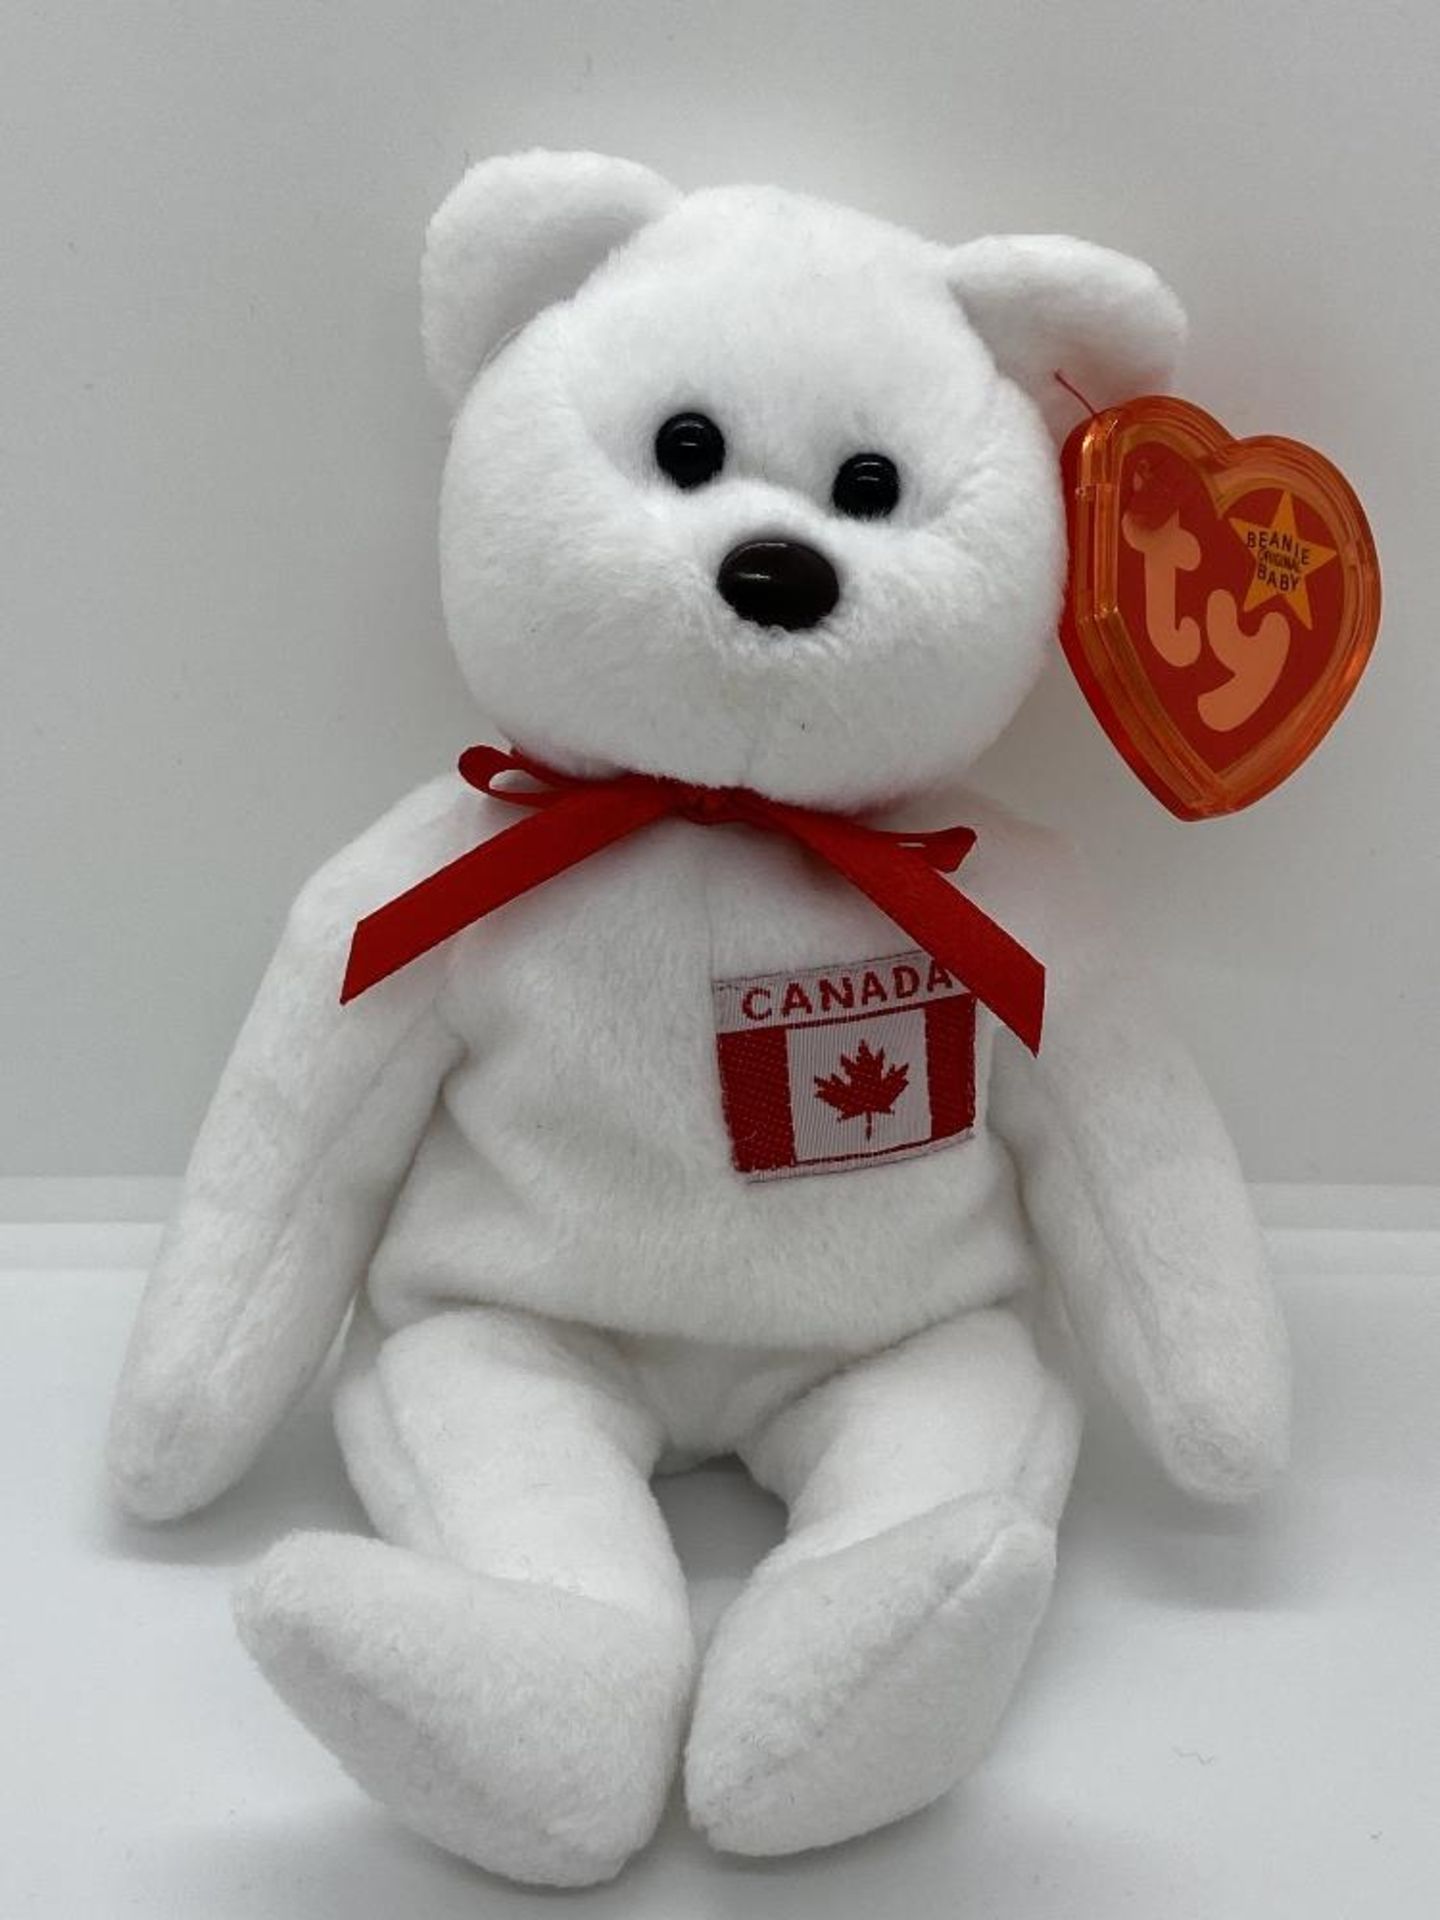 Ty Beanie Babies Maple, Canada Bear, 1996, PVC Pellets, In Case w/ Tags - Image 2 of 8